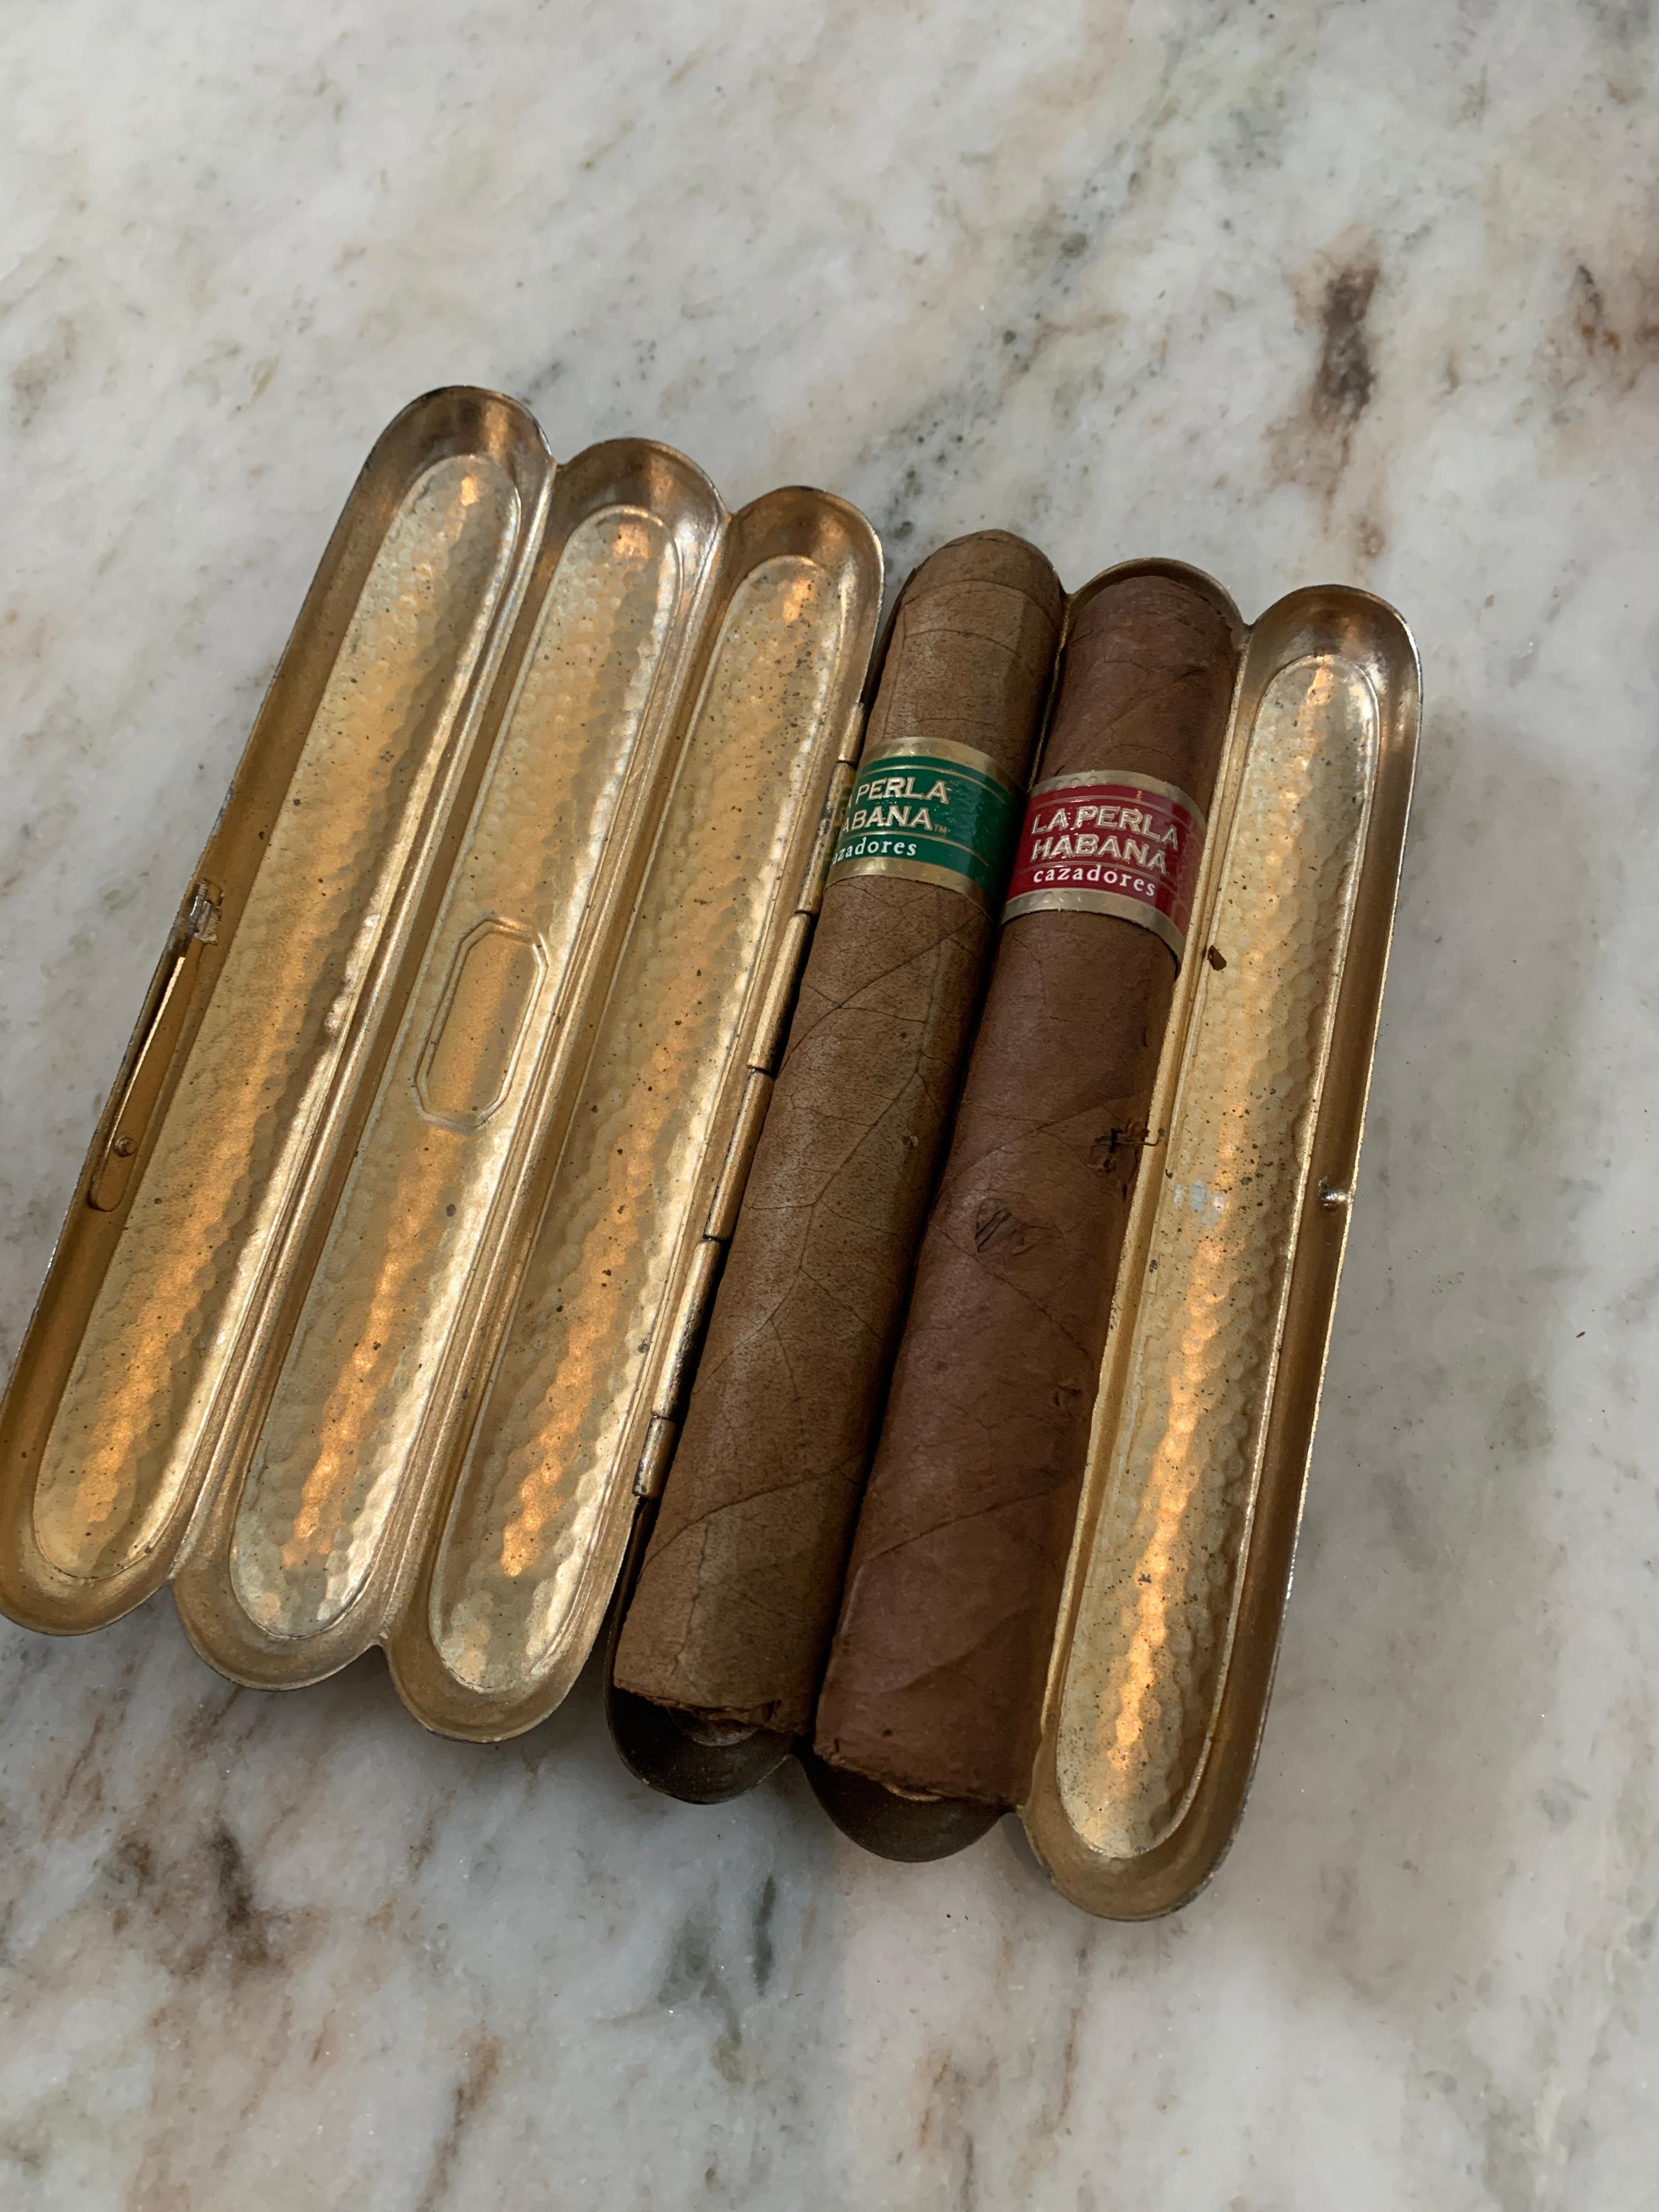 A wonderful case for three cigars of your choice... cuban, hand rolled... you name it.

Tin case is perfect place to stash three for the game, dance or long weekend. 
The piece locks as not to lose any of your preferred smokes.